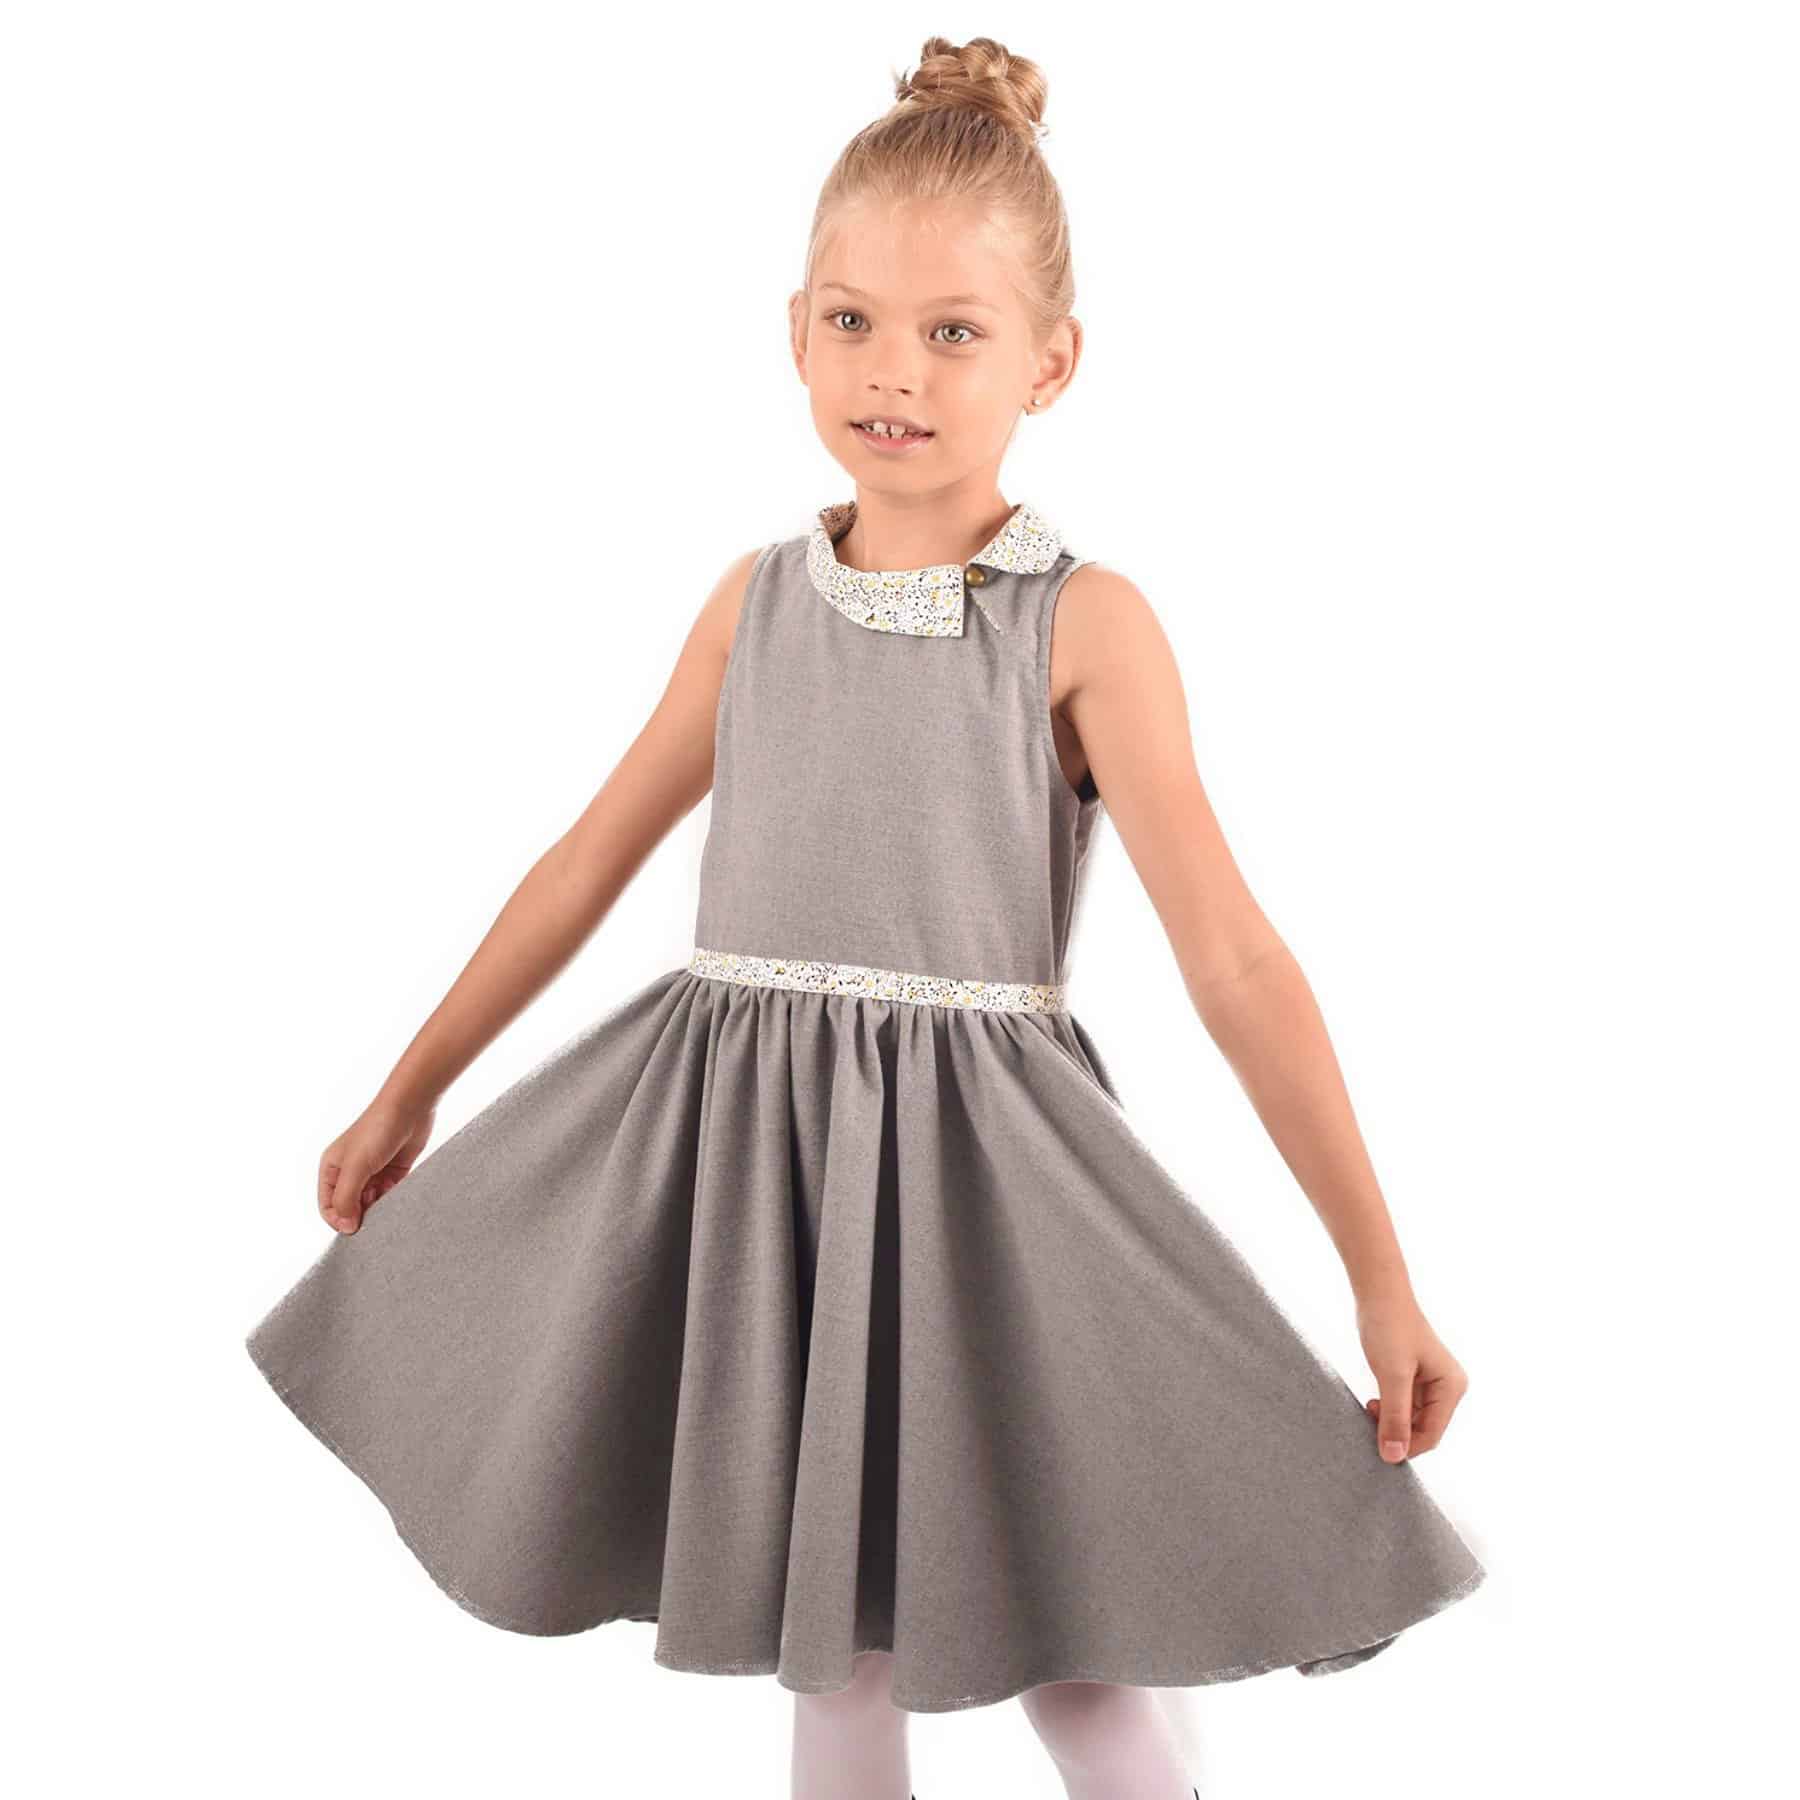 Light grey wool dress with white floral pointed Claudine collar for girls from the children's fashion brand La Faute à Voltaire